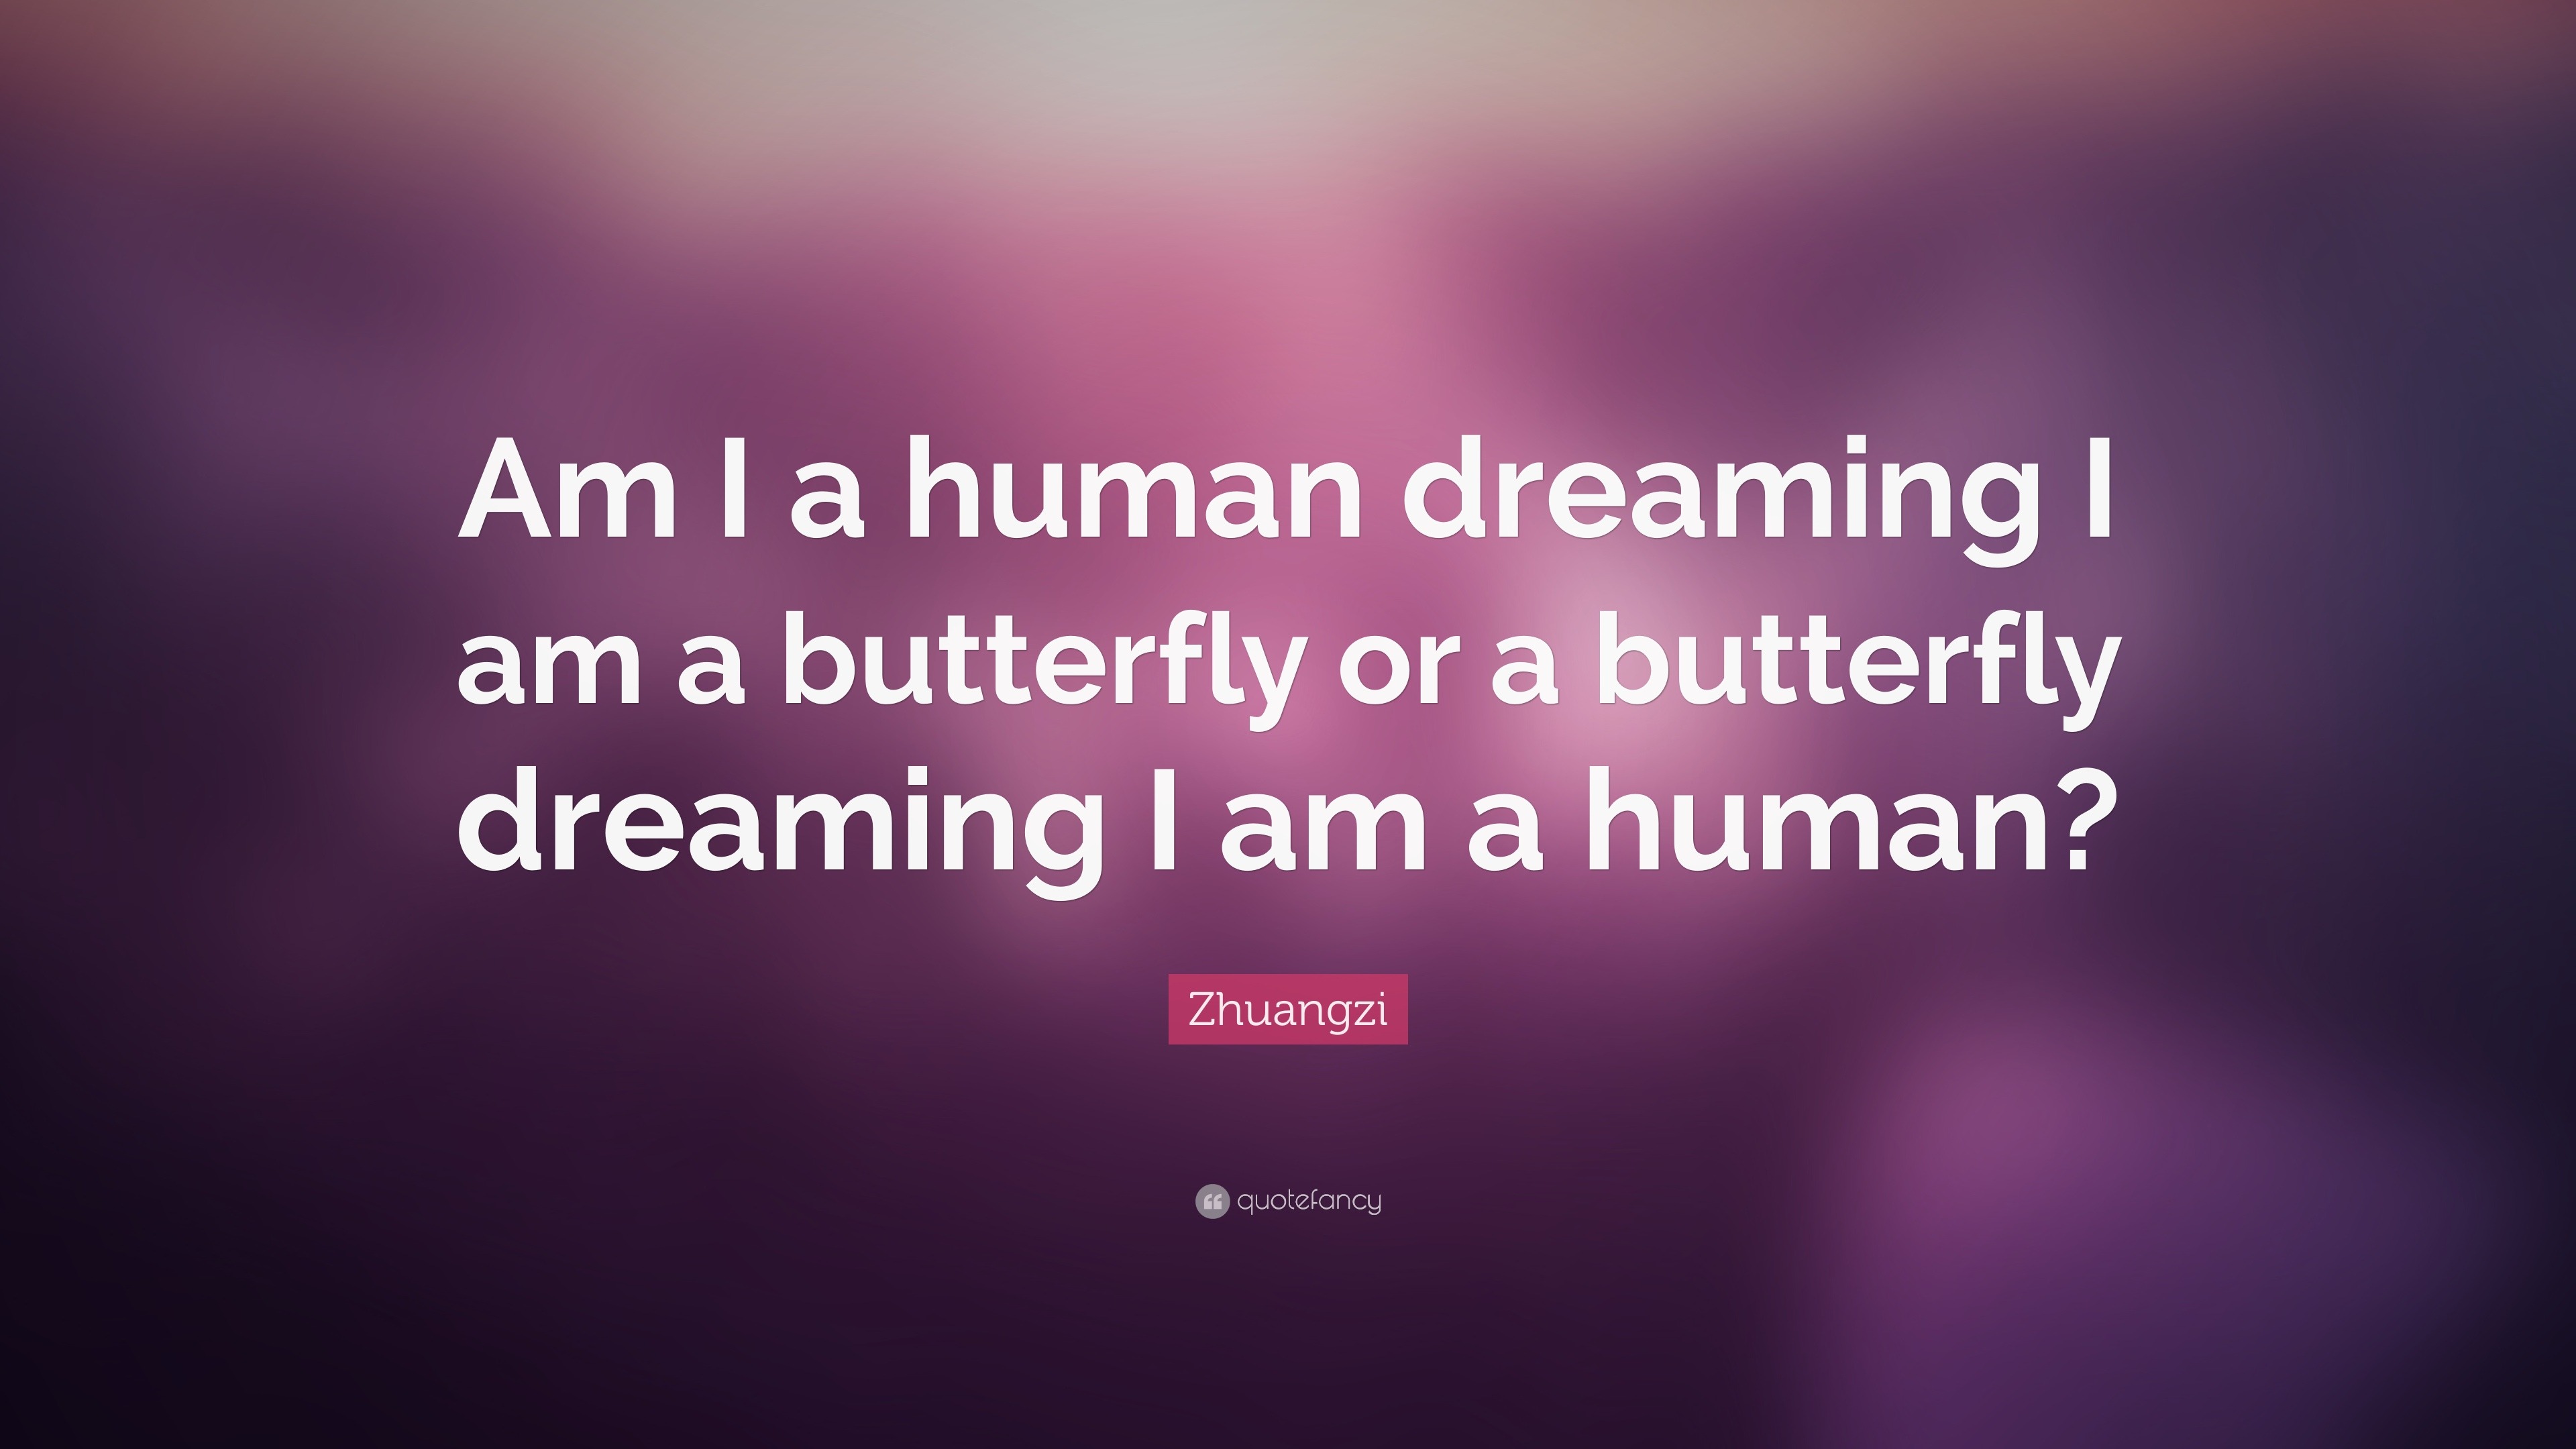 Zhuangzi quote: Once I dreamed I was a butterfly, and now I